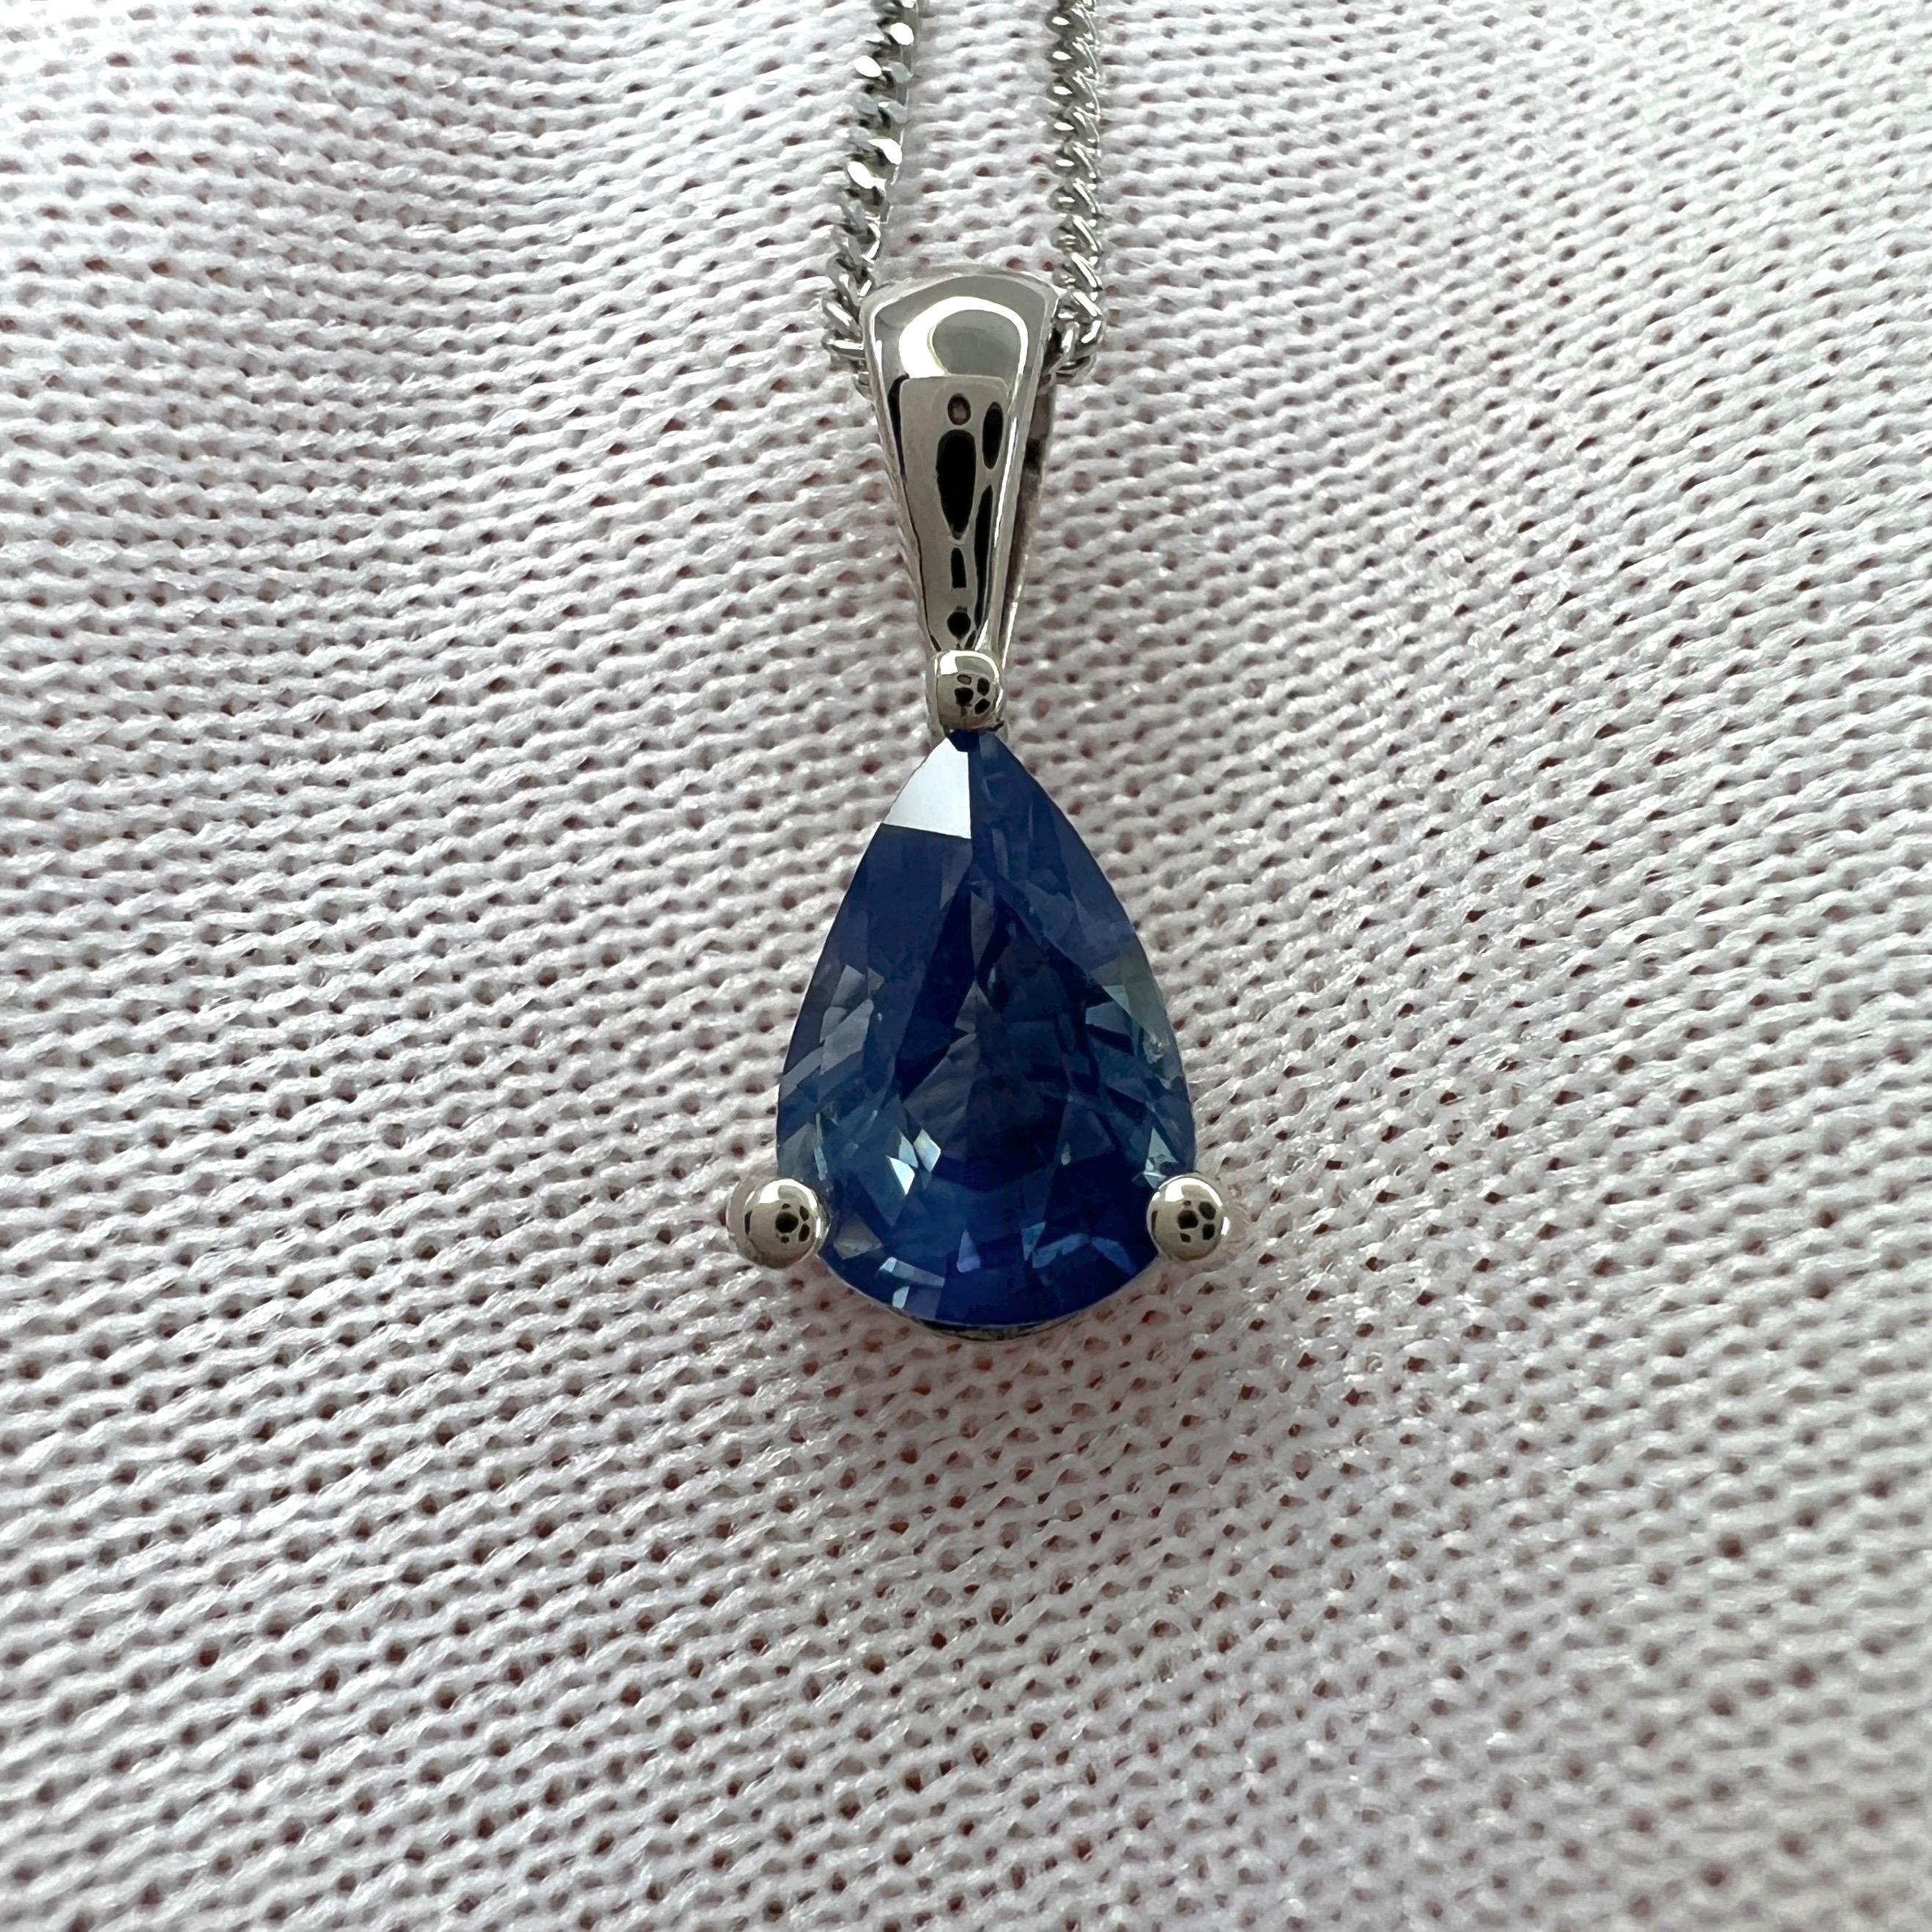 Unique Teal Blue Ceylon Sapphire 18k White Gold Pear Teardrop Cut Pendant Necklace.

0.85 Carat sapphire with a beautiful unique teal blue colour and excellent clarity, a very clean stone.

Mined in Sri Lanka, source of some of the finest sapphires